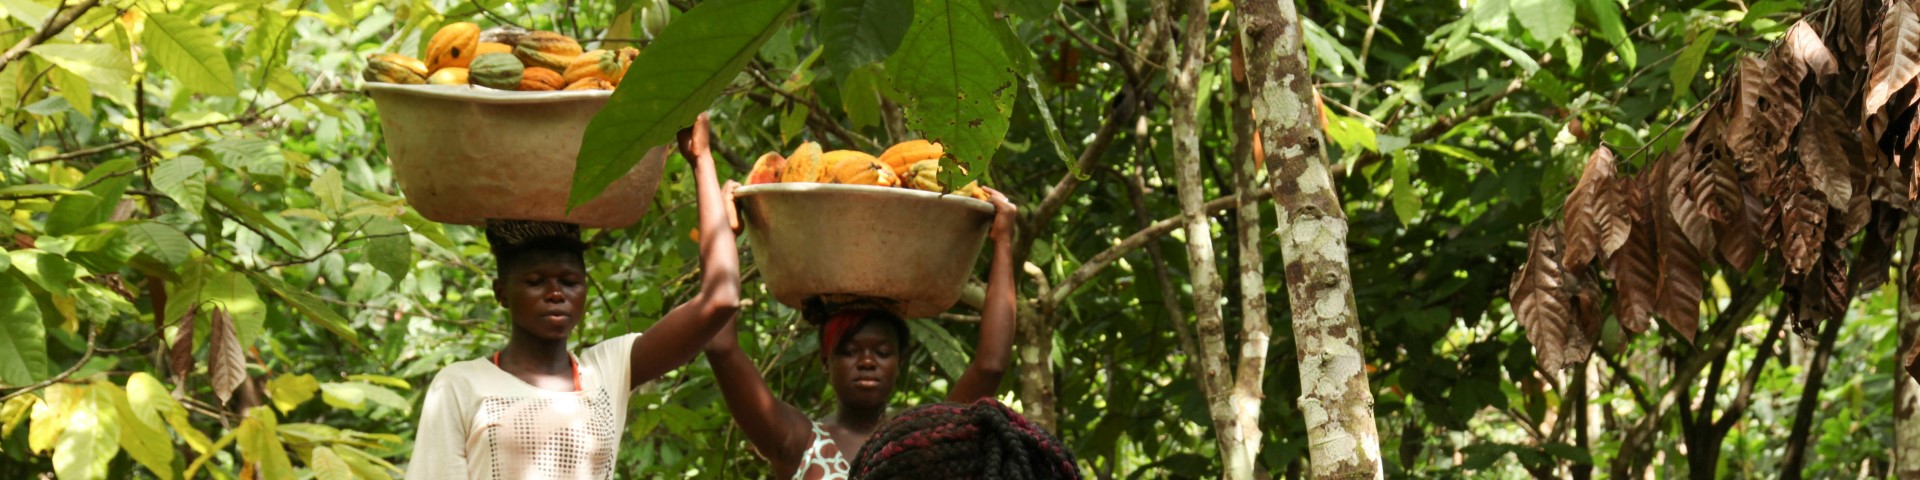 Two women carrying large baskets full of cacao pods on their heads. Copyright: GIZ